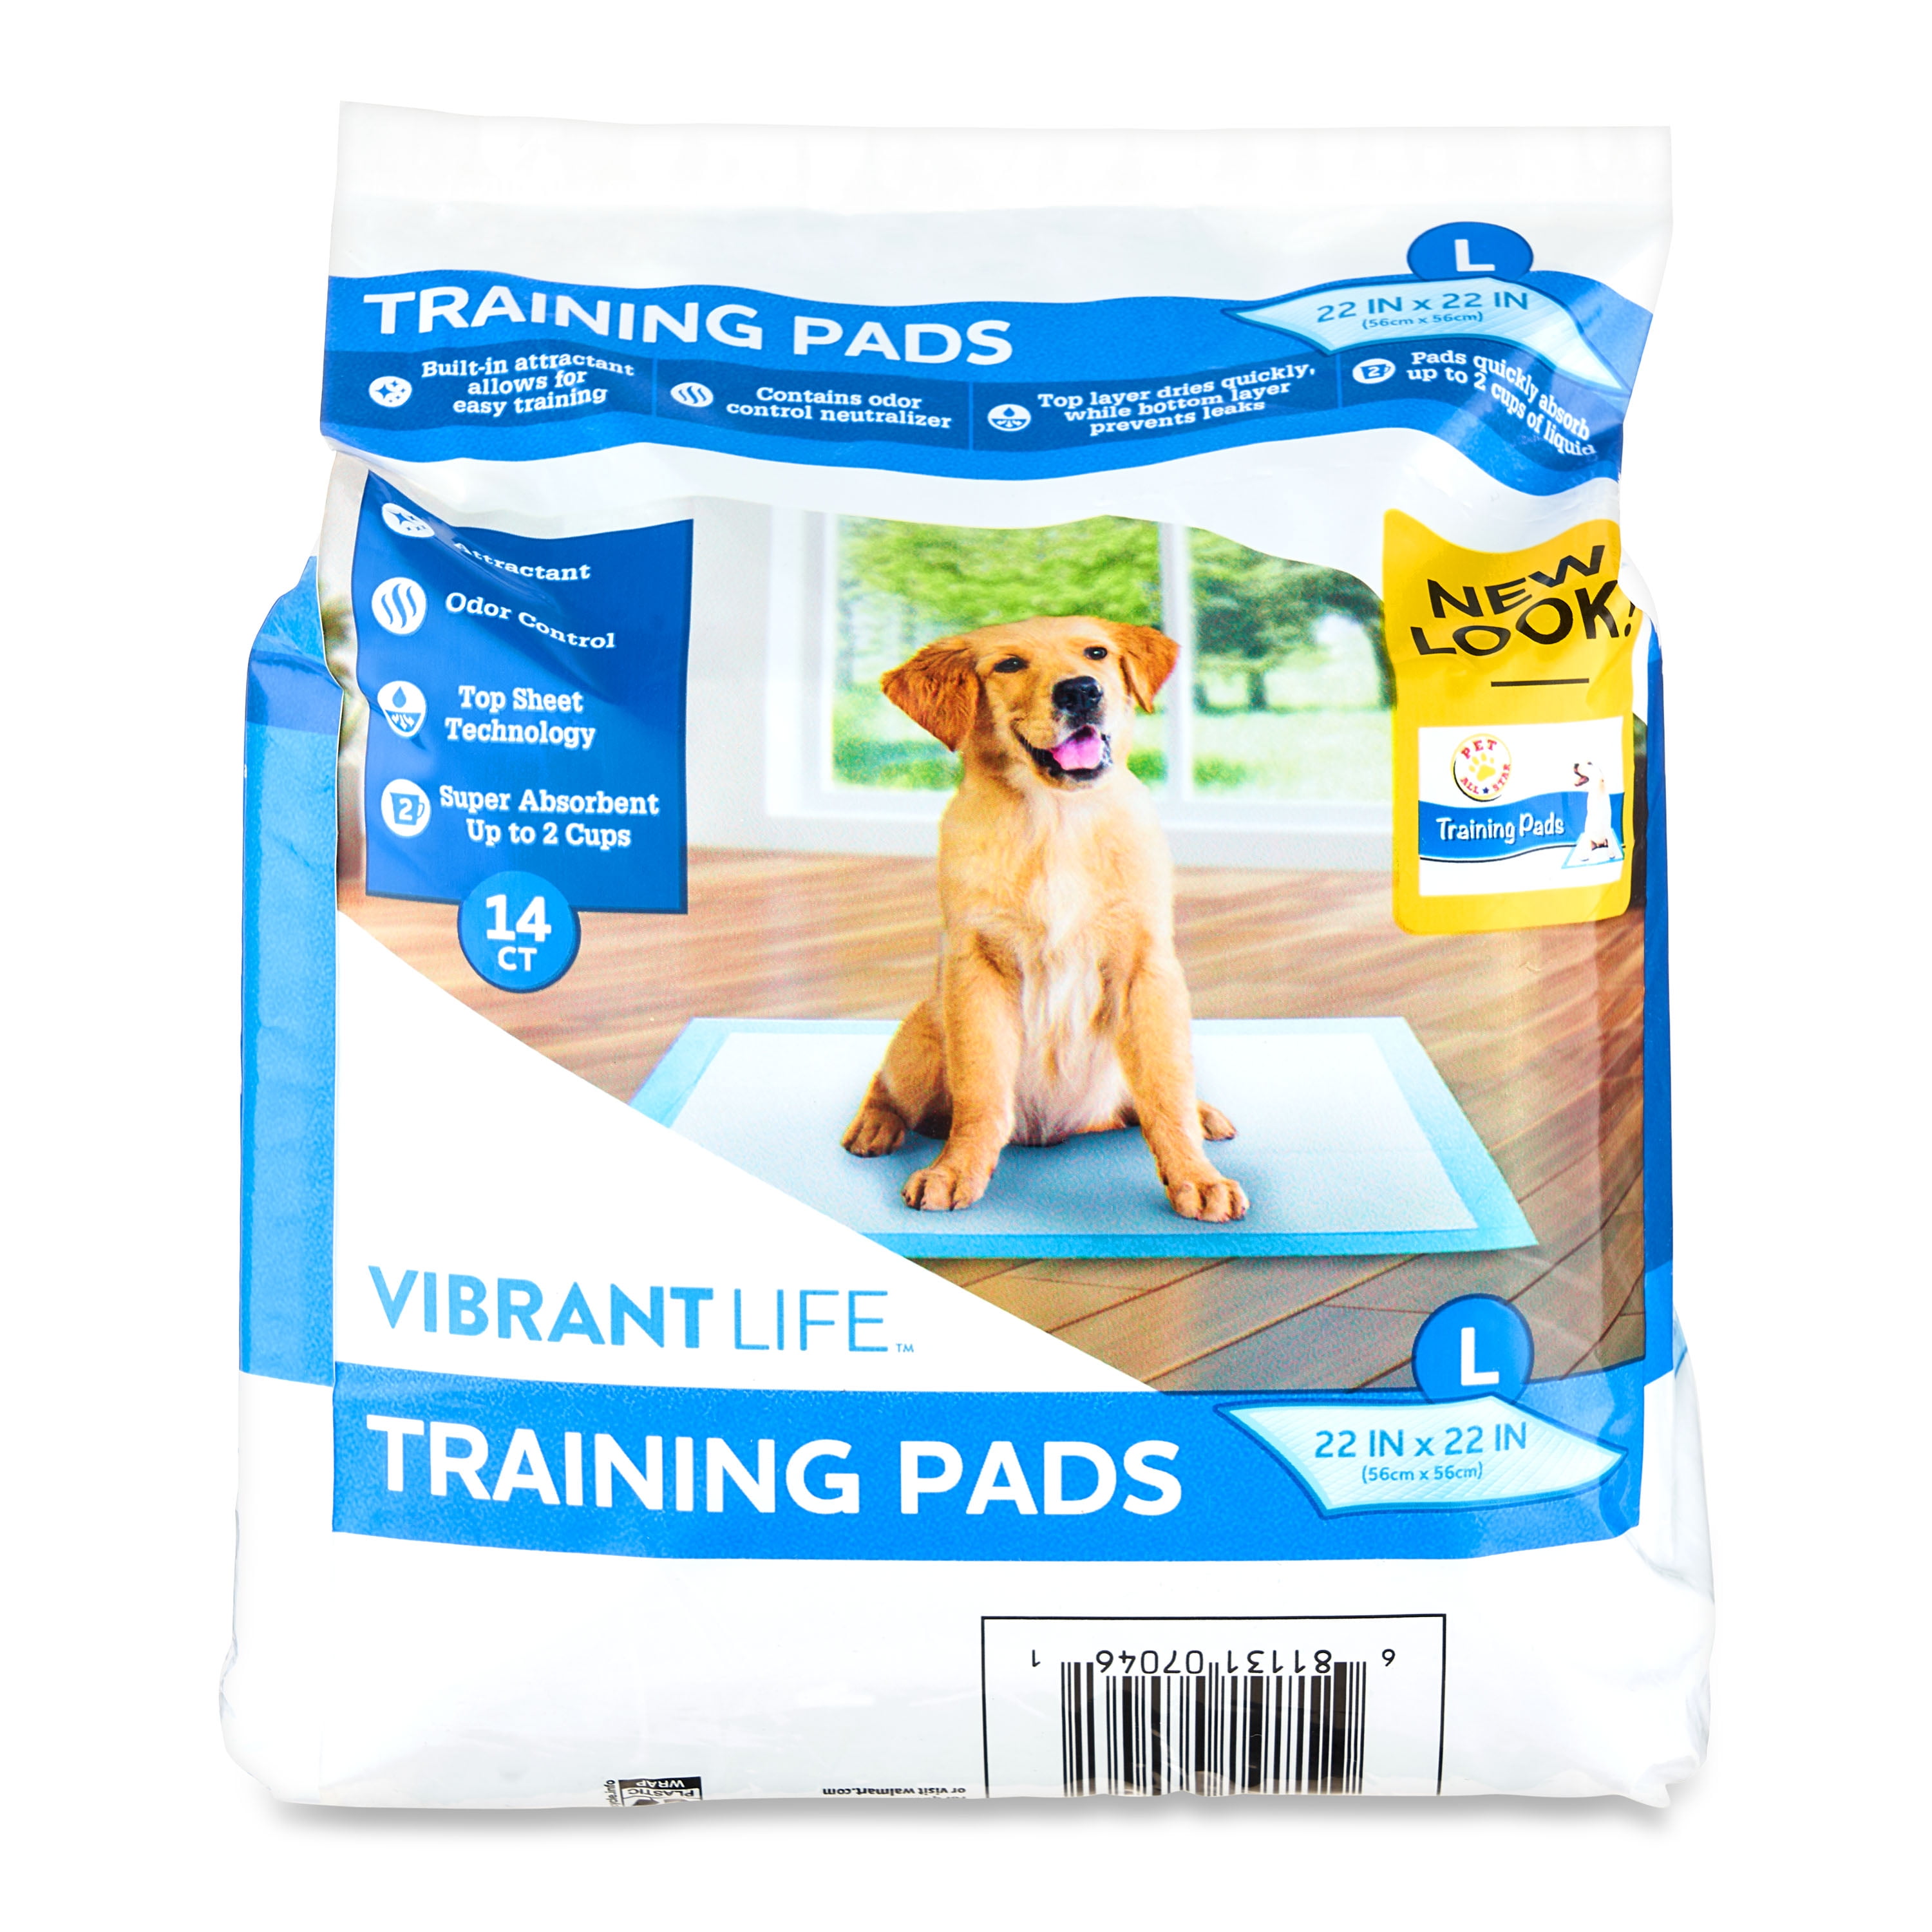 Vibrant Life 14CT Puppy Pads